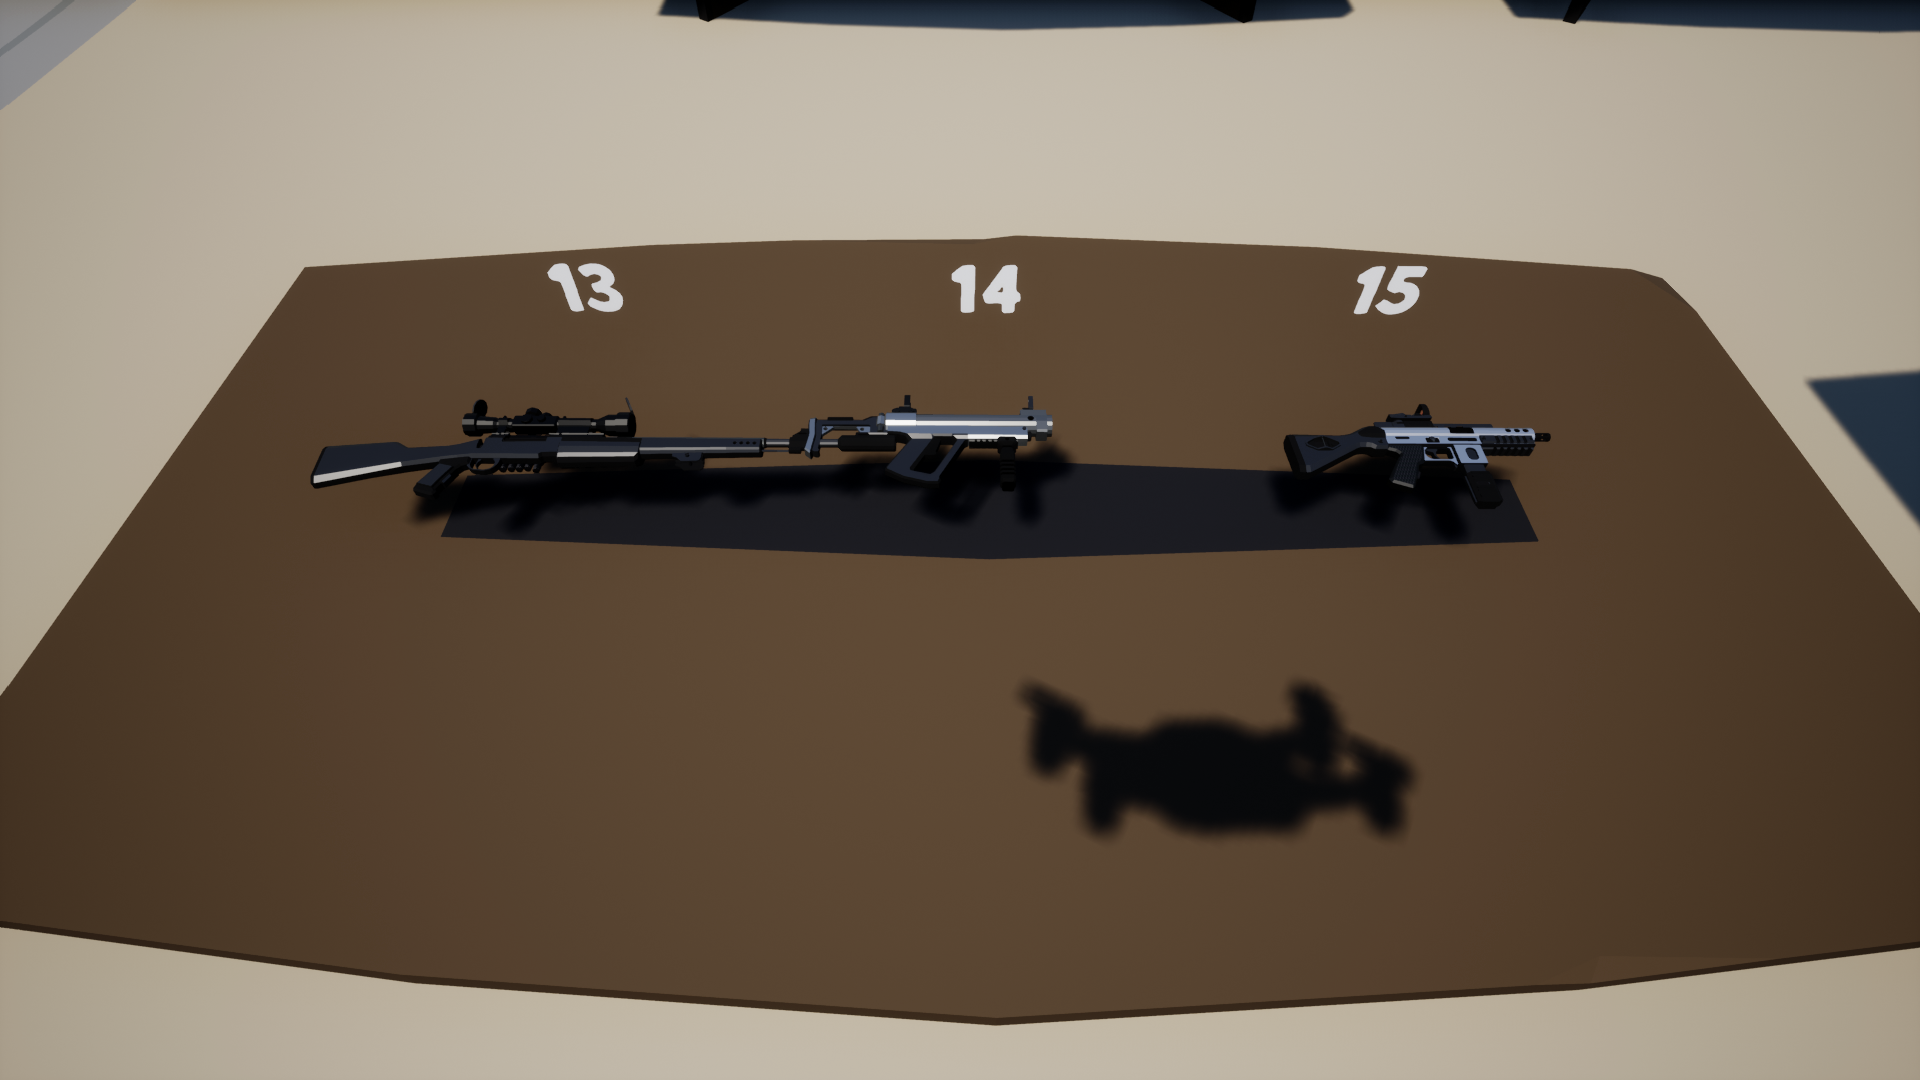 Perfect Heist 2 Level Editor Weapon Variant Selection - Weapons 13, 14, 15. - 22DA5FF